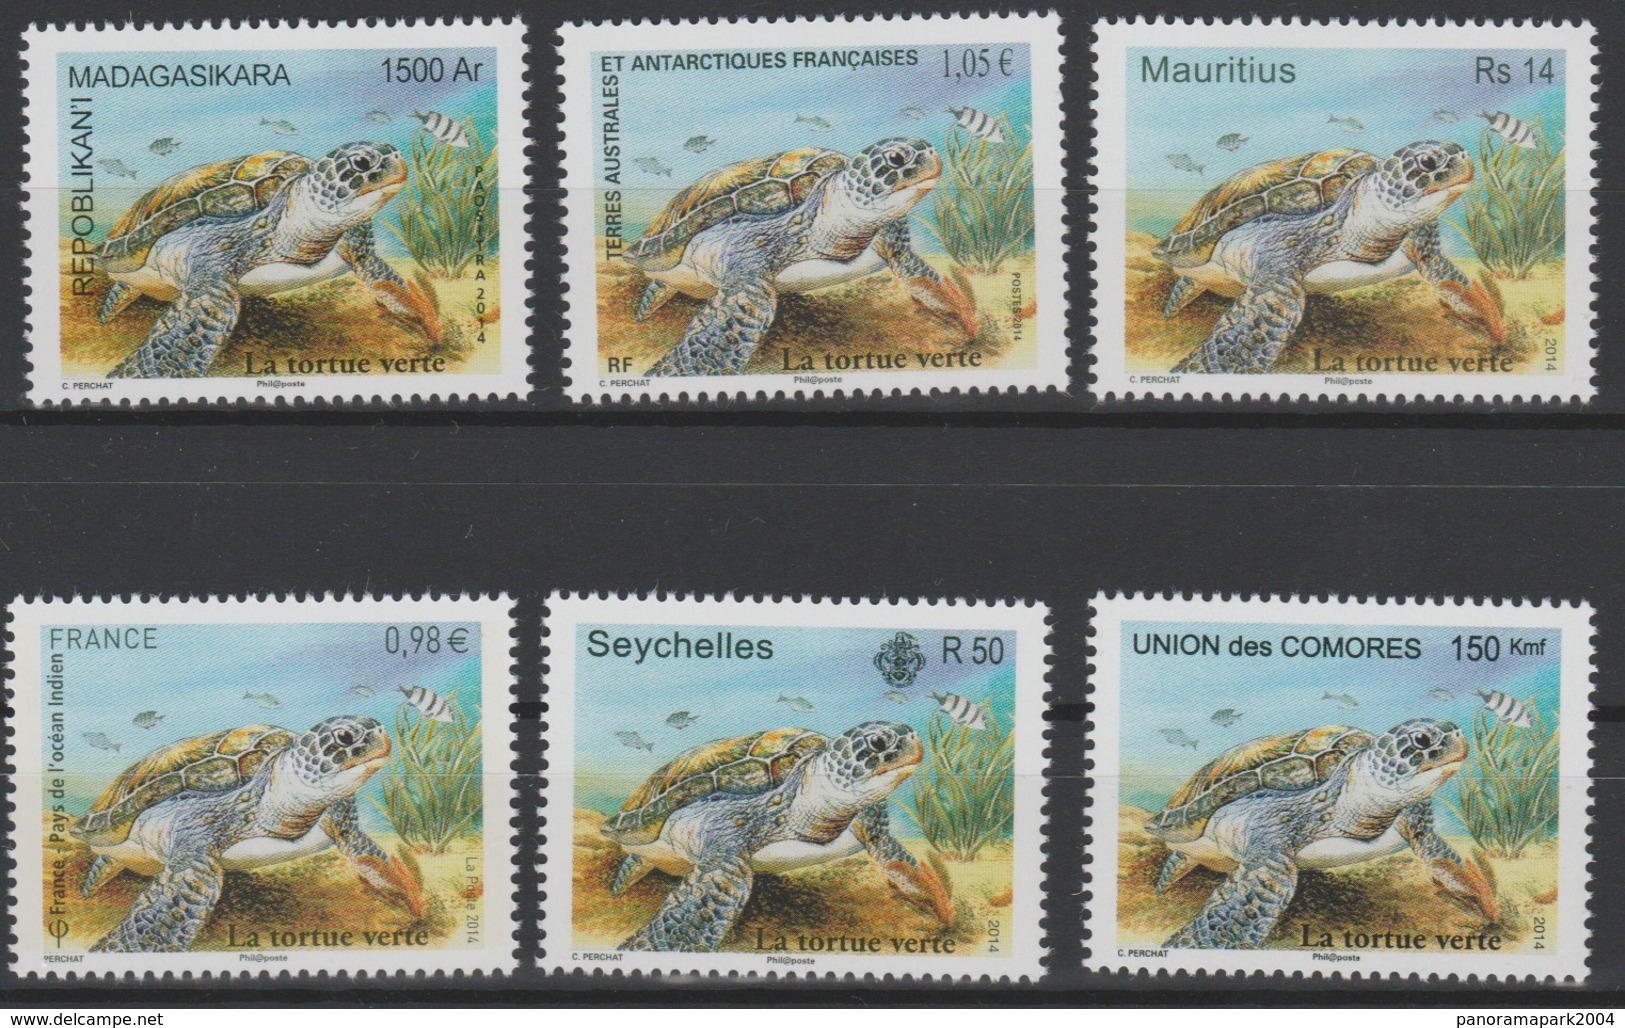 La Tortue Verte Green Turtle Schildkröte 2014 Joint Issue Faune Fauna Madagascar Seychelles France Comores MNH 6 Val. ** - Maurice (1968-...)